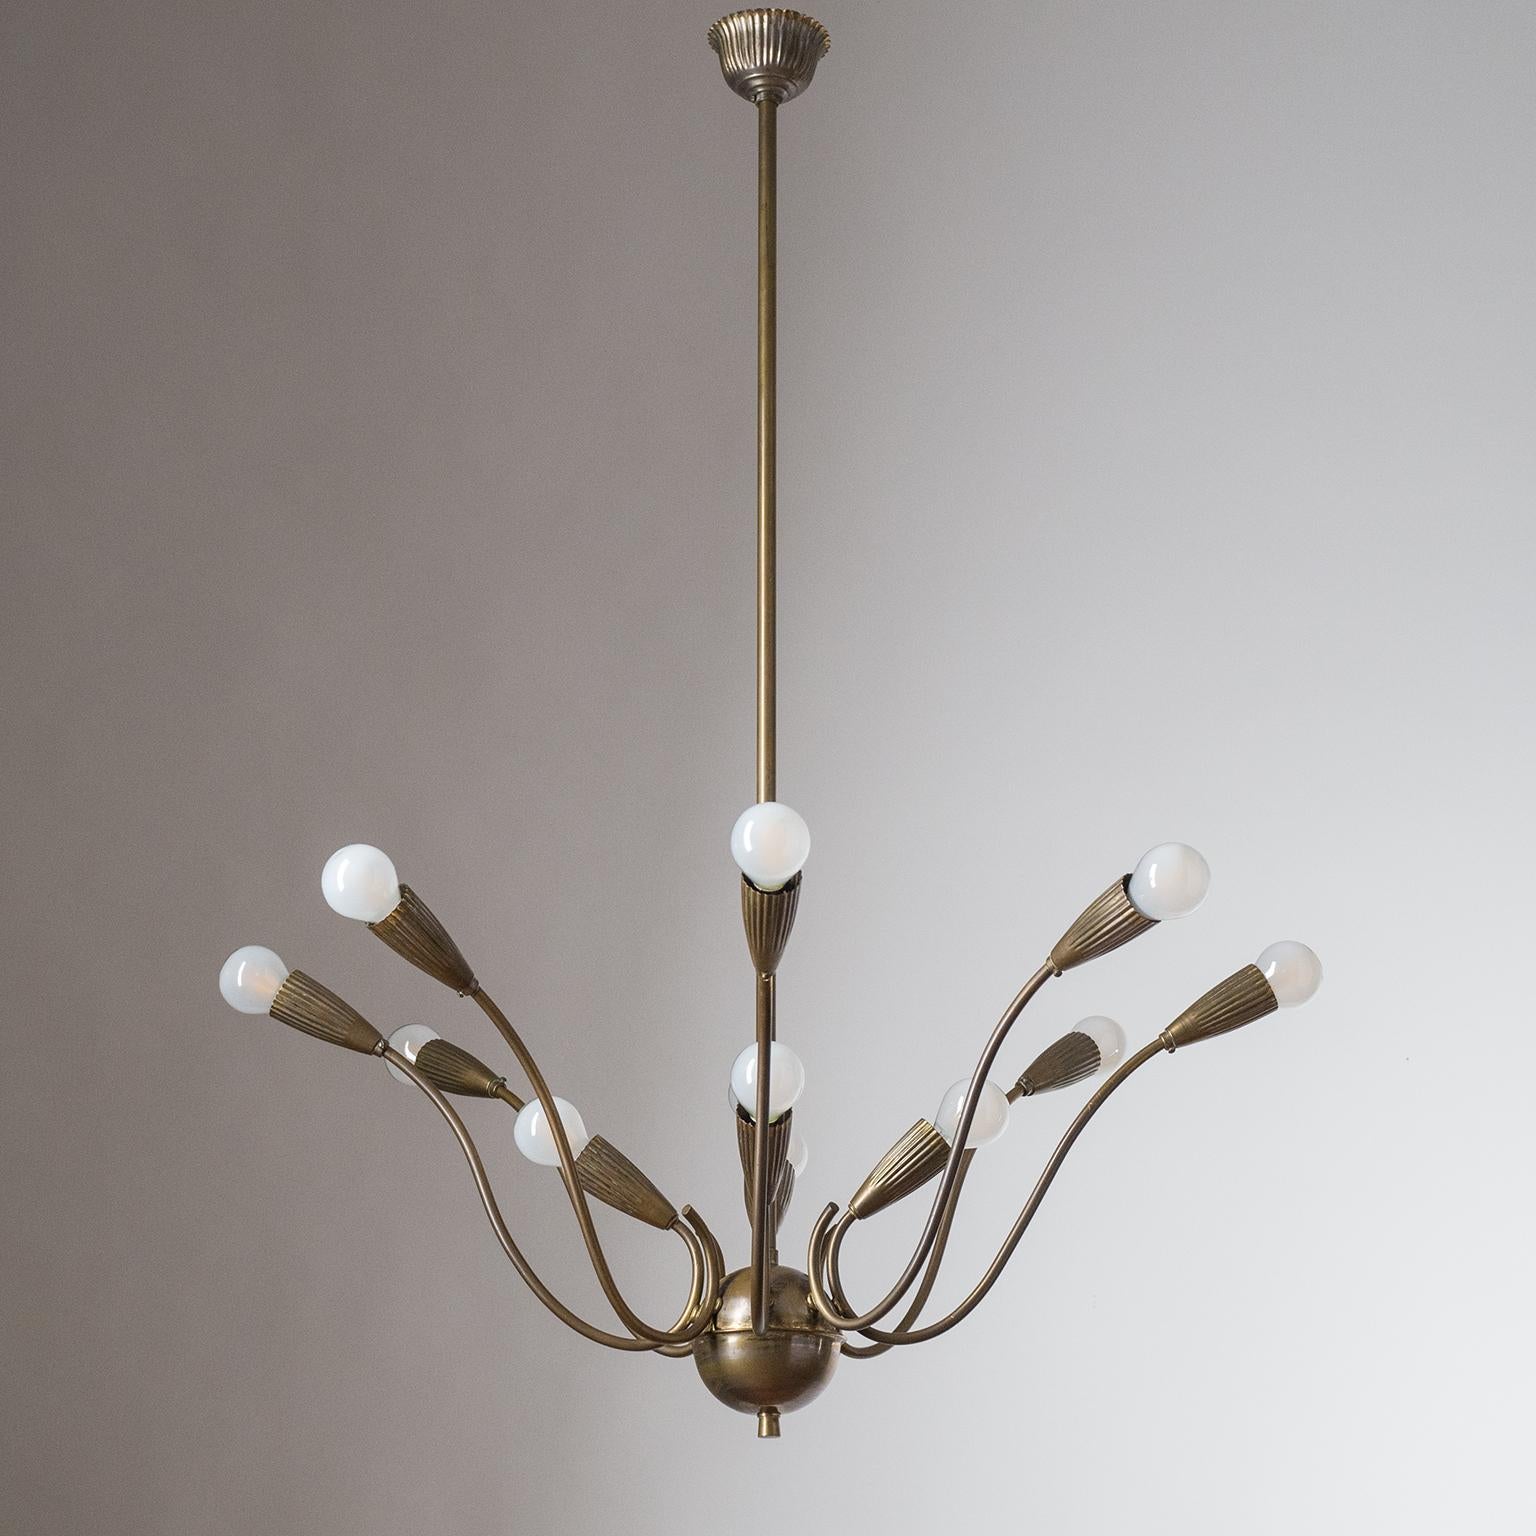 Elegant 12-light Italian brass chandelier attributed to early Stilnovo production, circa 1948. Rare frilled brass socket covers and canopy. Parts of the chandelier (center piece, socket covers and canopy) were probably originally nickel-plated,